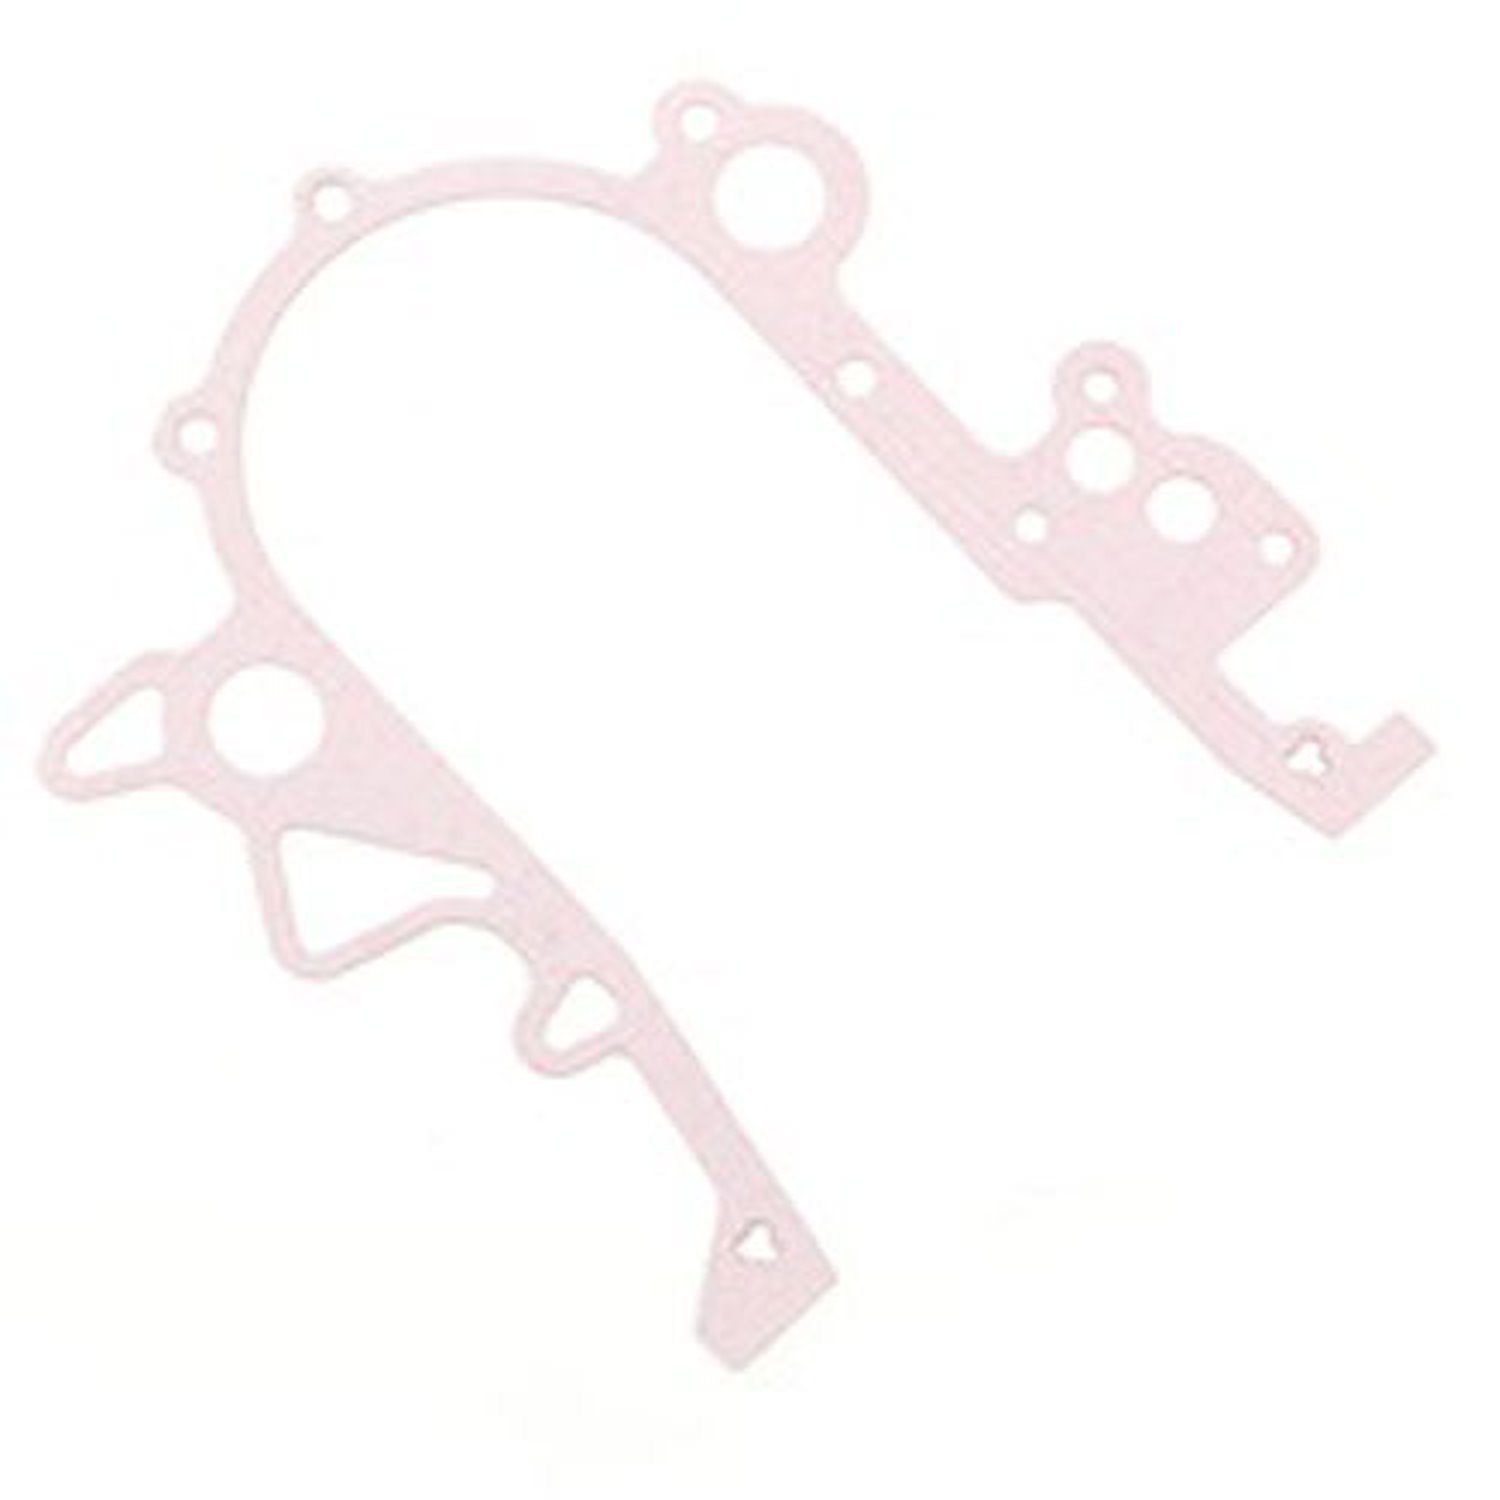 This timing cover gasket from Omix-ADA fits 3.8L